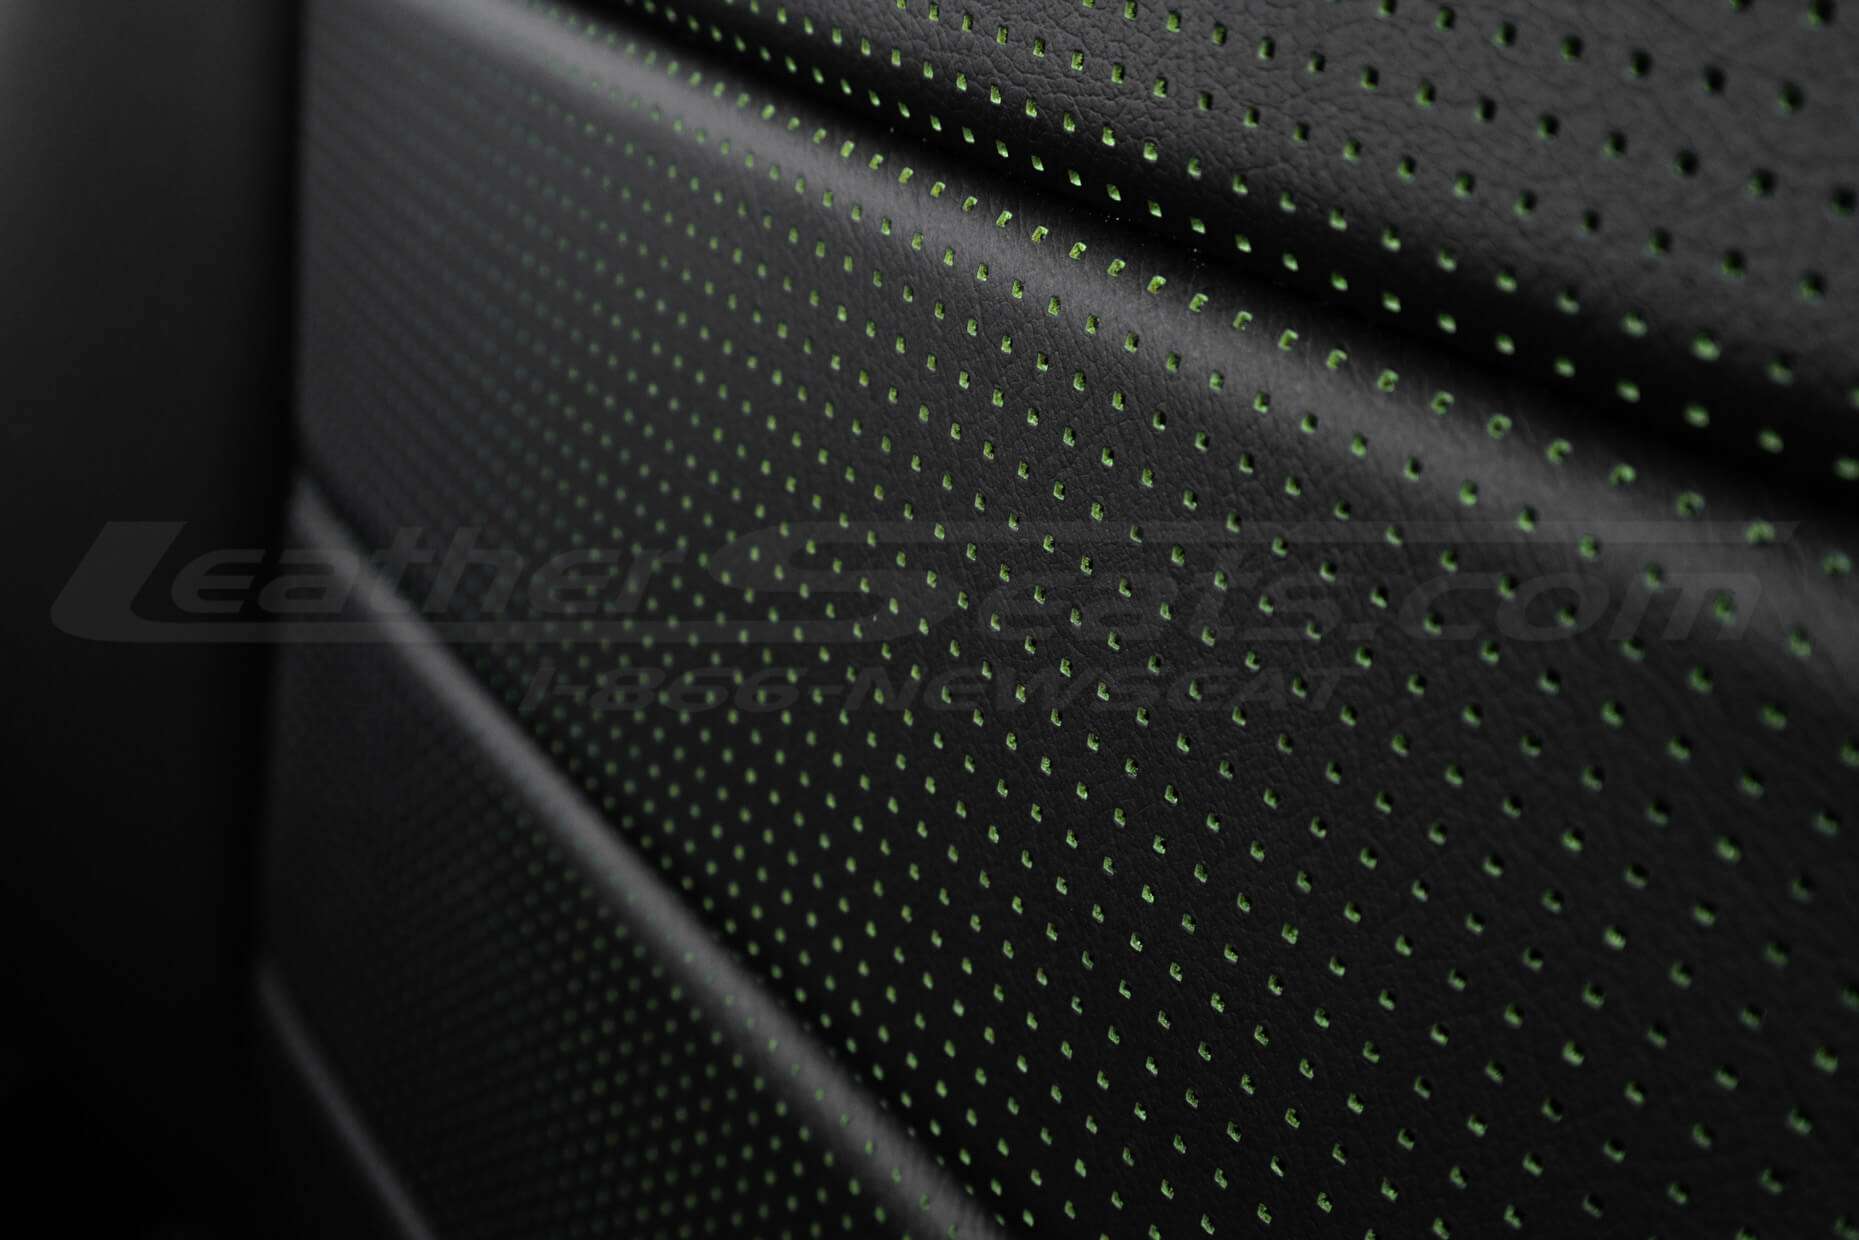 Piazza Green Perforation close-up